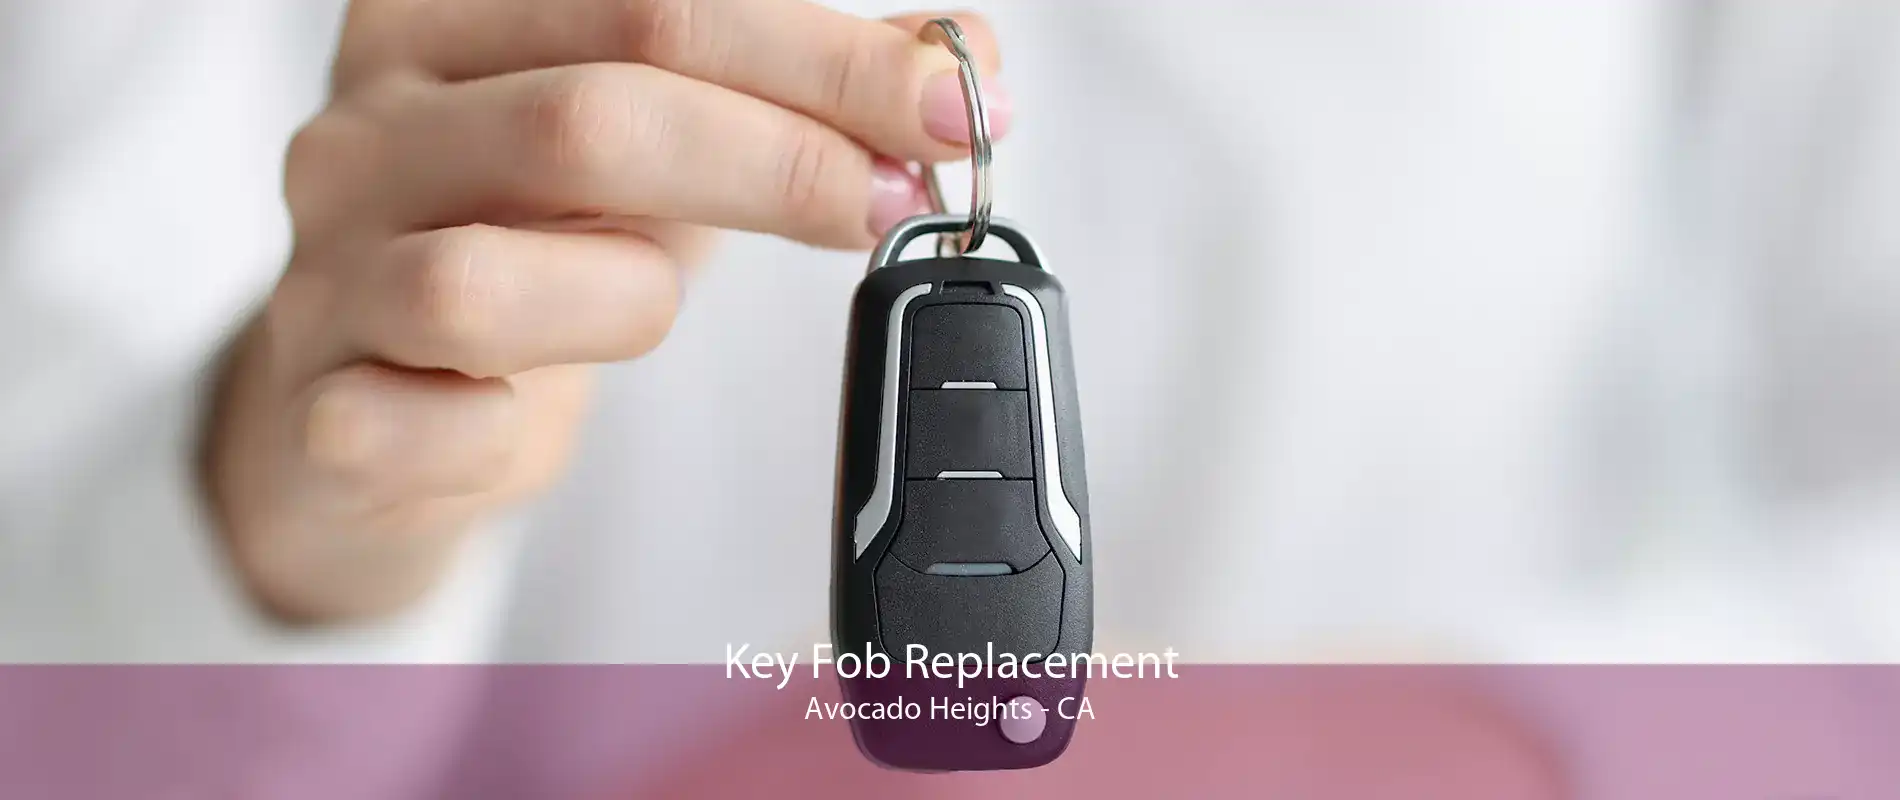 Key Fob Replacement Avocado Heights - CA